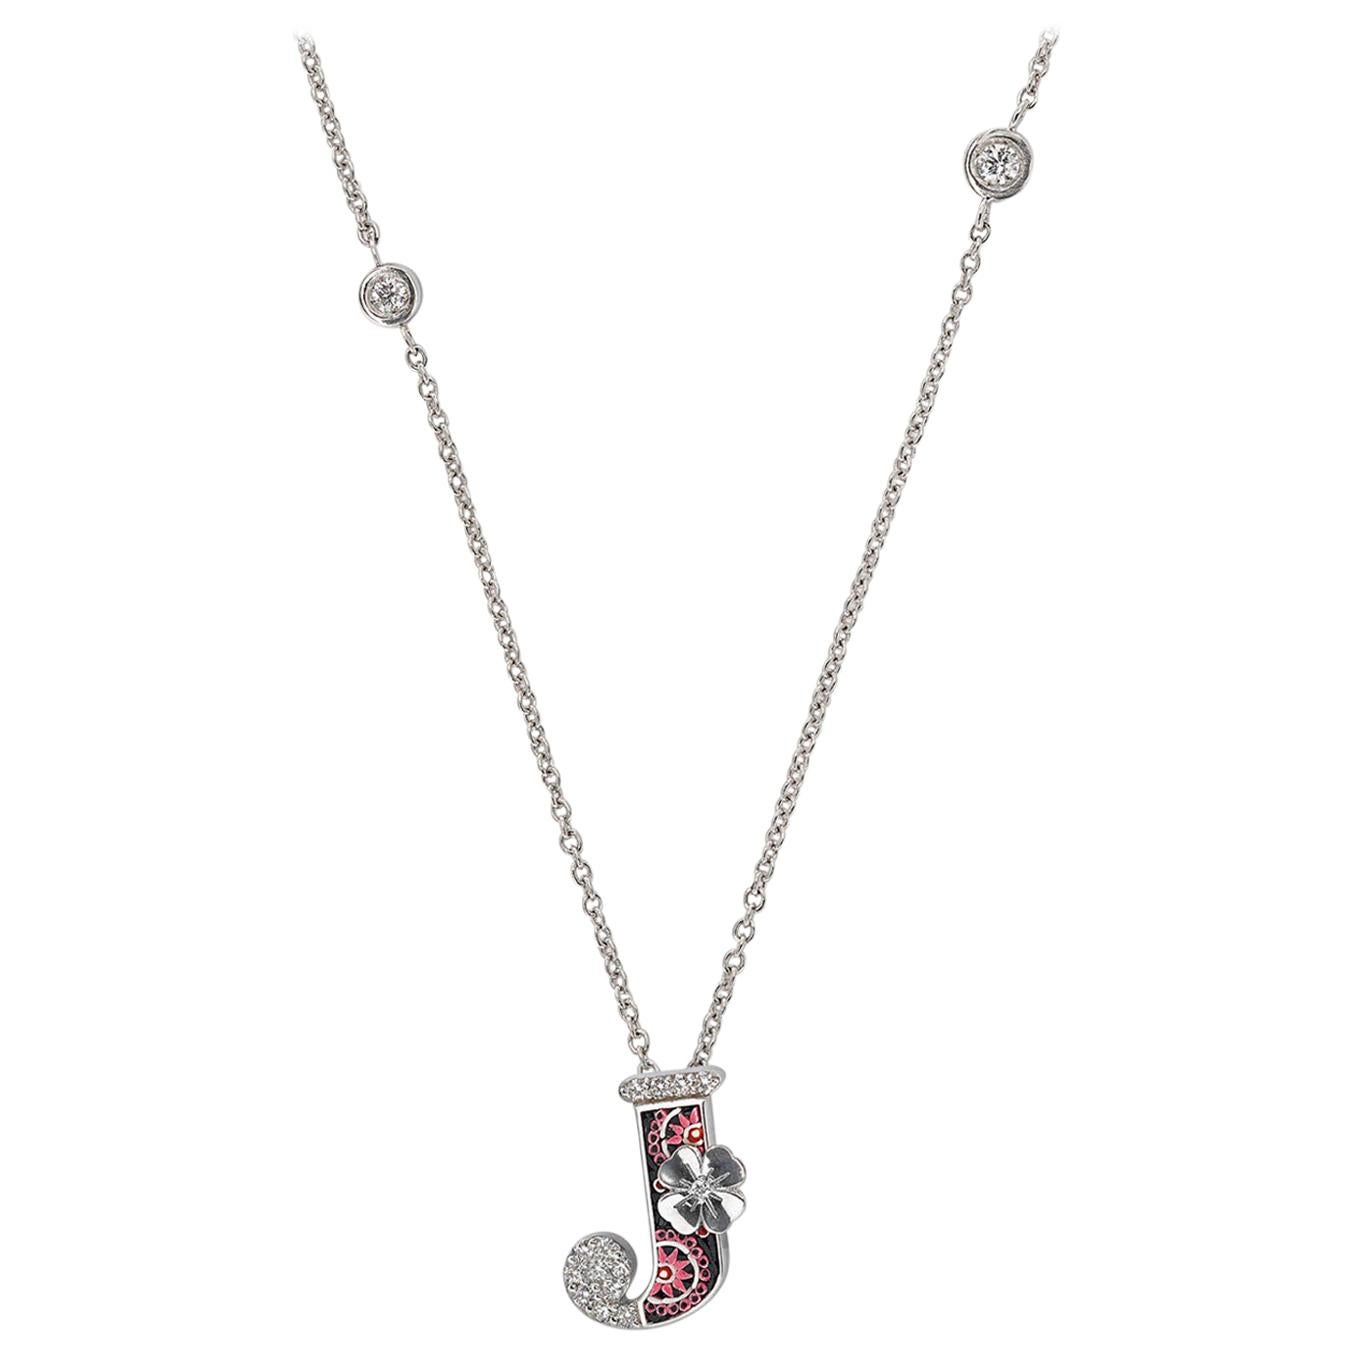 Necklace Letter J White Gold White Diamonds Hand Decorated with Micromosaic